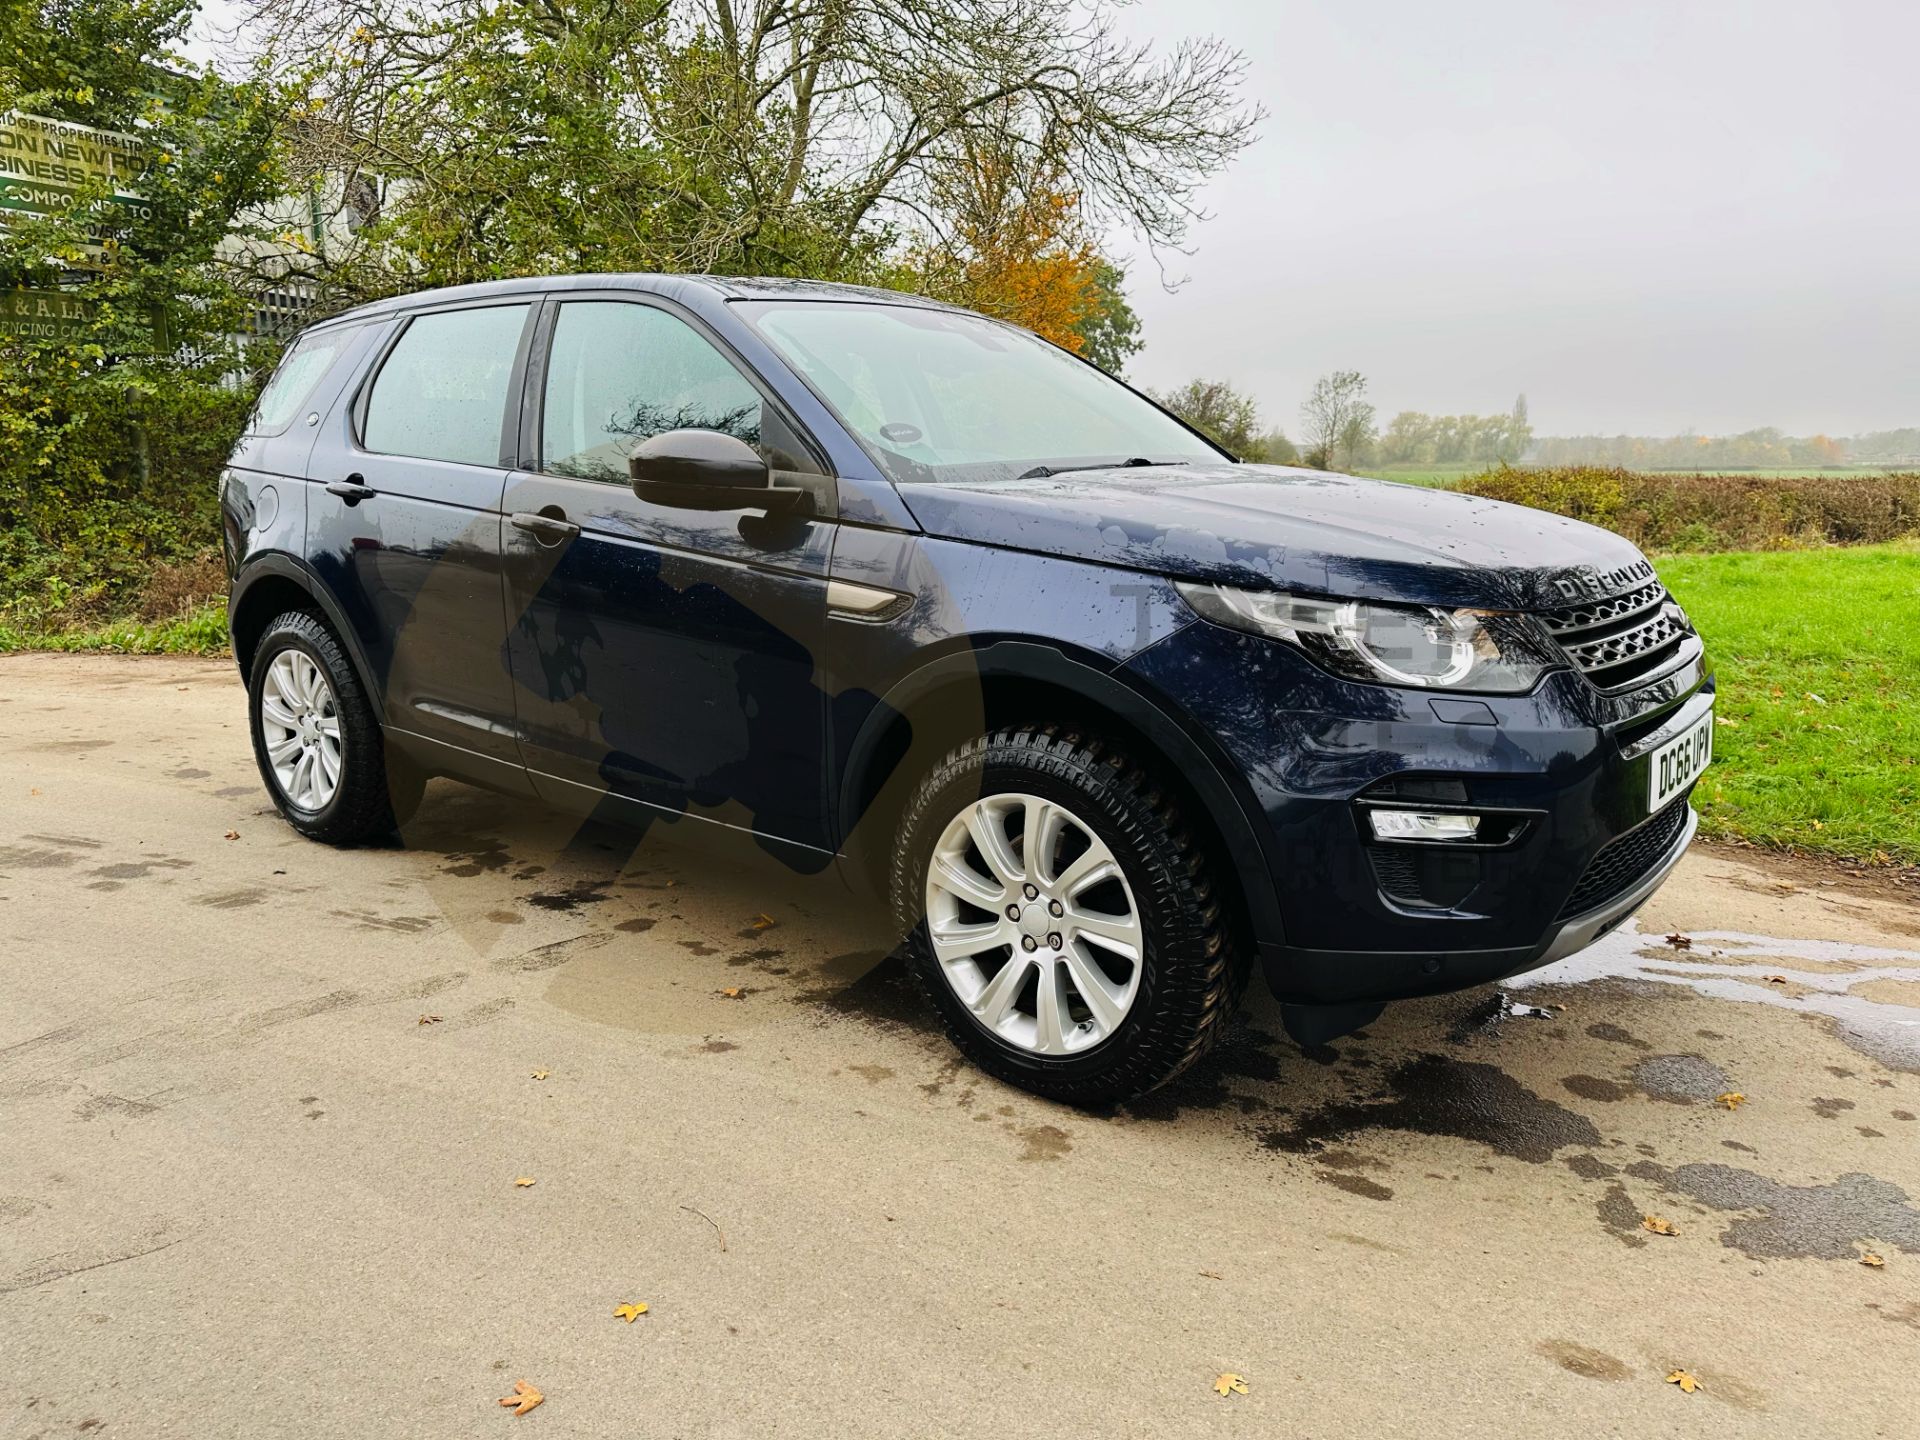 (ON SALE) LAND ROVER DISCOVERY SPORT *SE TECH* 2017 MODEL - FULL SERVICE HISTORY -1 OWNER - NO VAT!! - Image 2 of 43